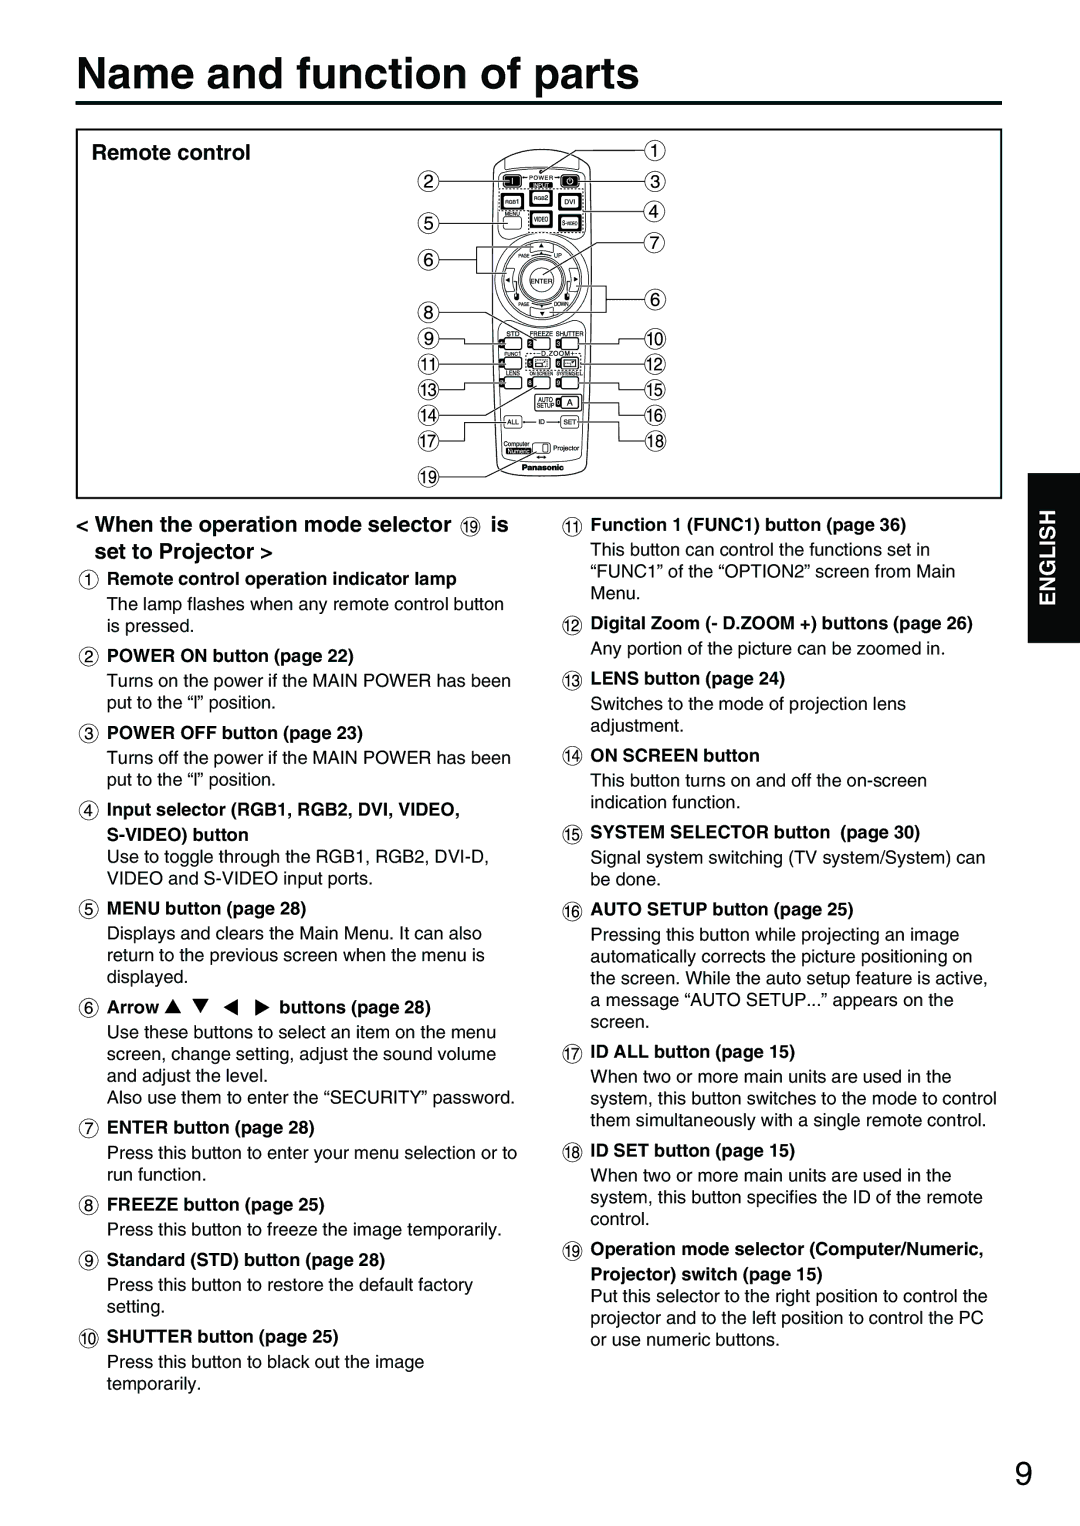 Panasonic PT-D3500E manual Name and function of parts 